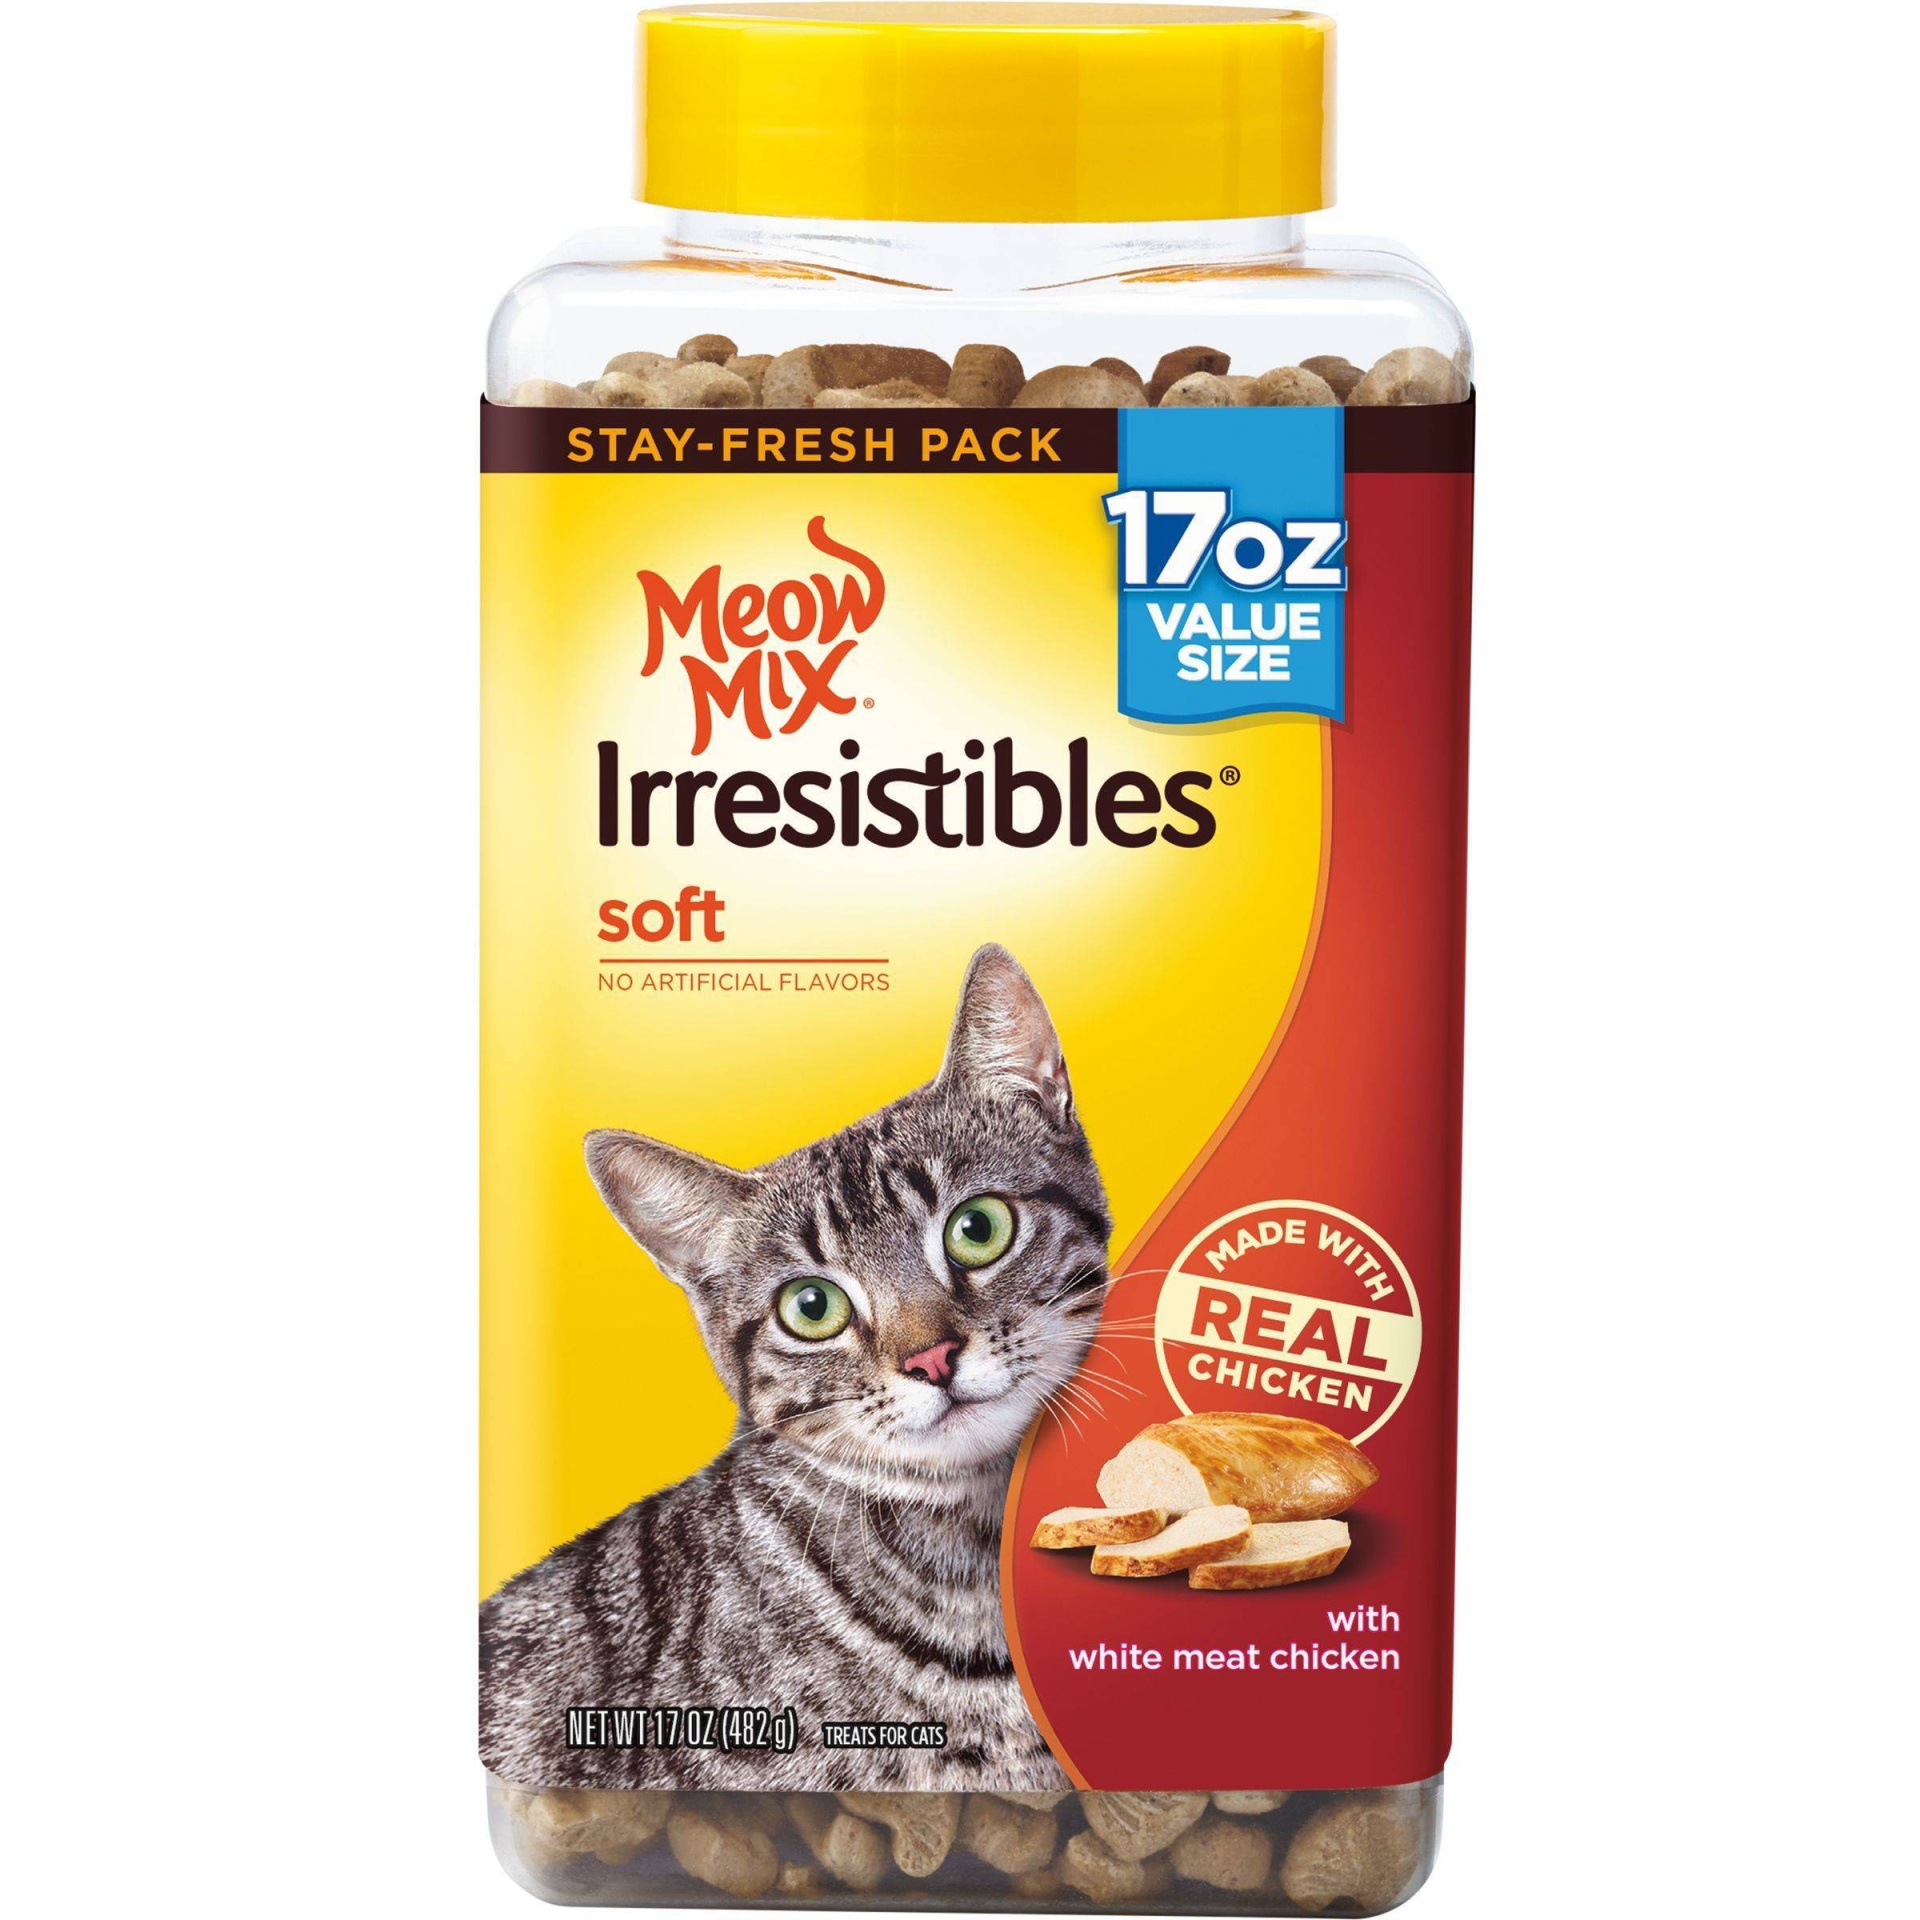 slide 1 of 4, Meow Mix Irresistibles with Chicken Soft Chewy Cat Treats, 17 oz